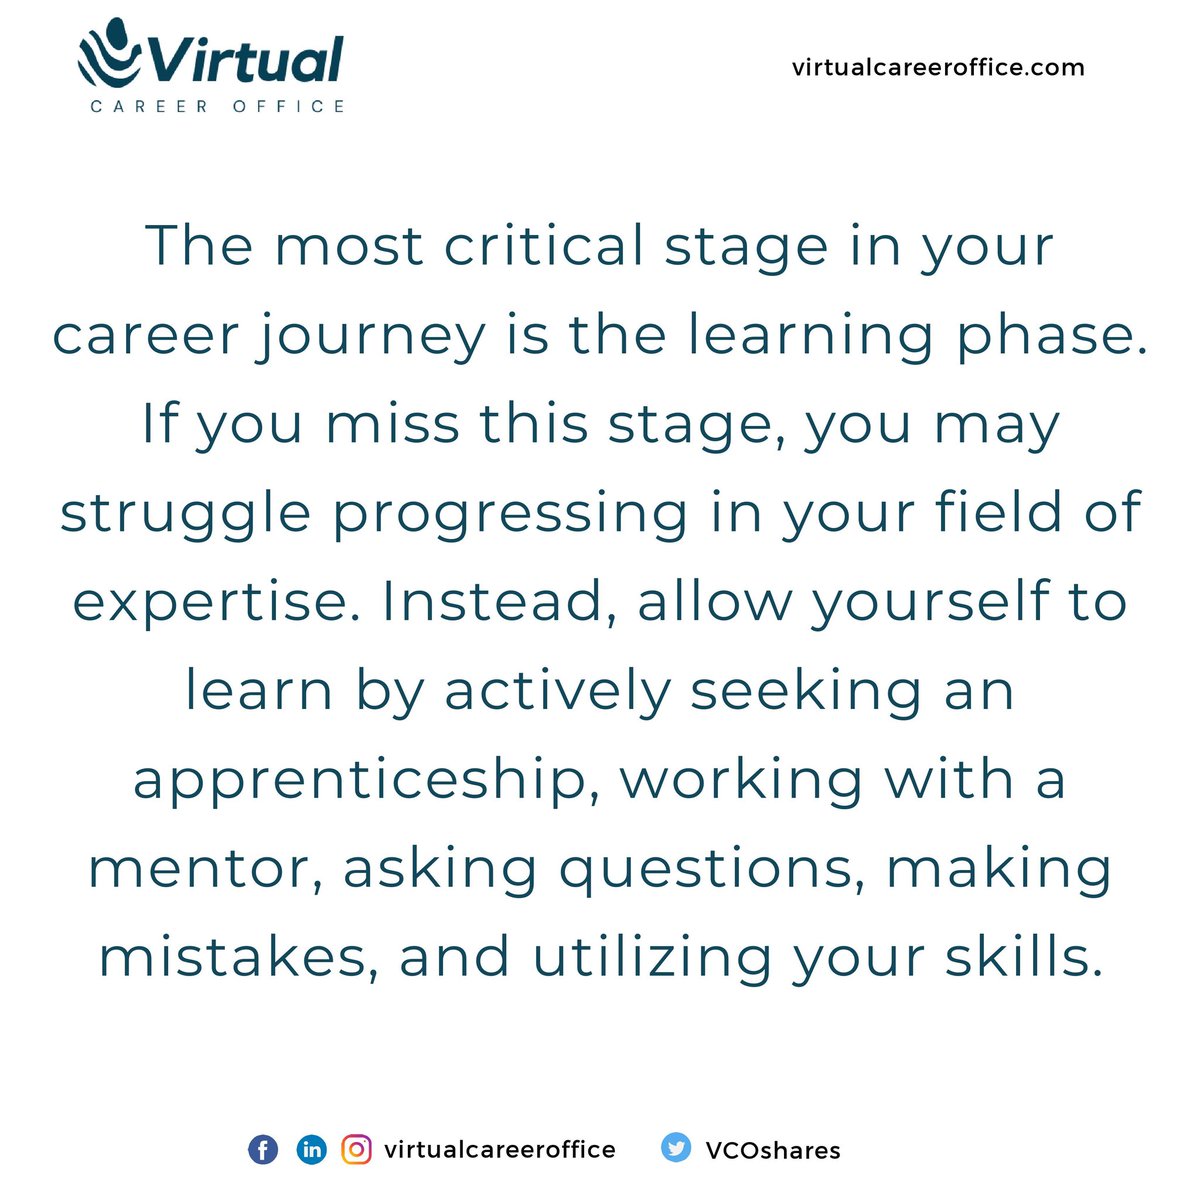 The most critical stage in your career journey is the learning phase. Never stop learning.

#vcoshares #career #careerdiscovery  #careeradvising #learning #mentorship #apprenticeship